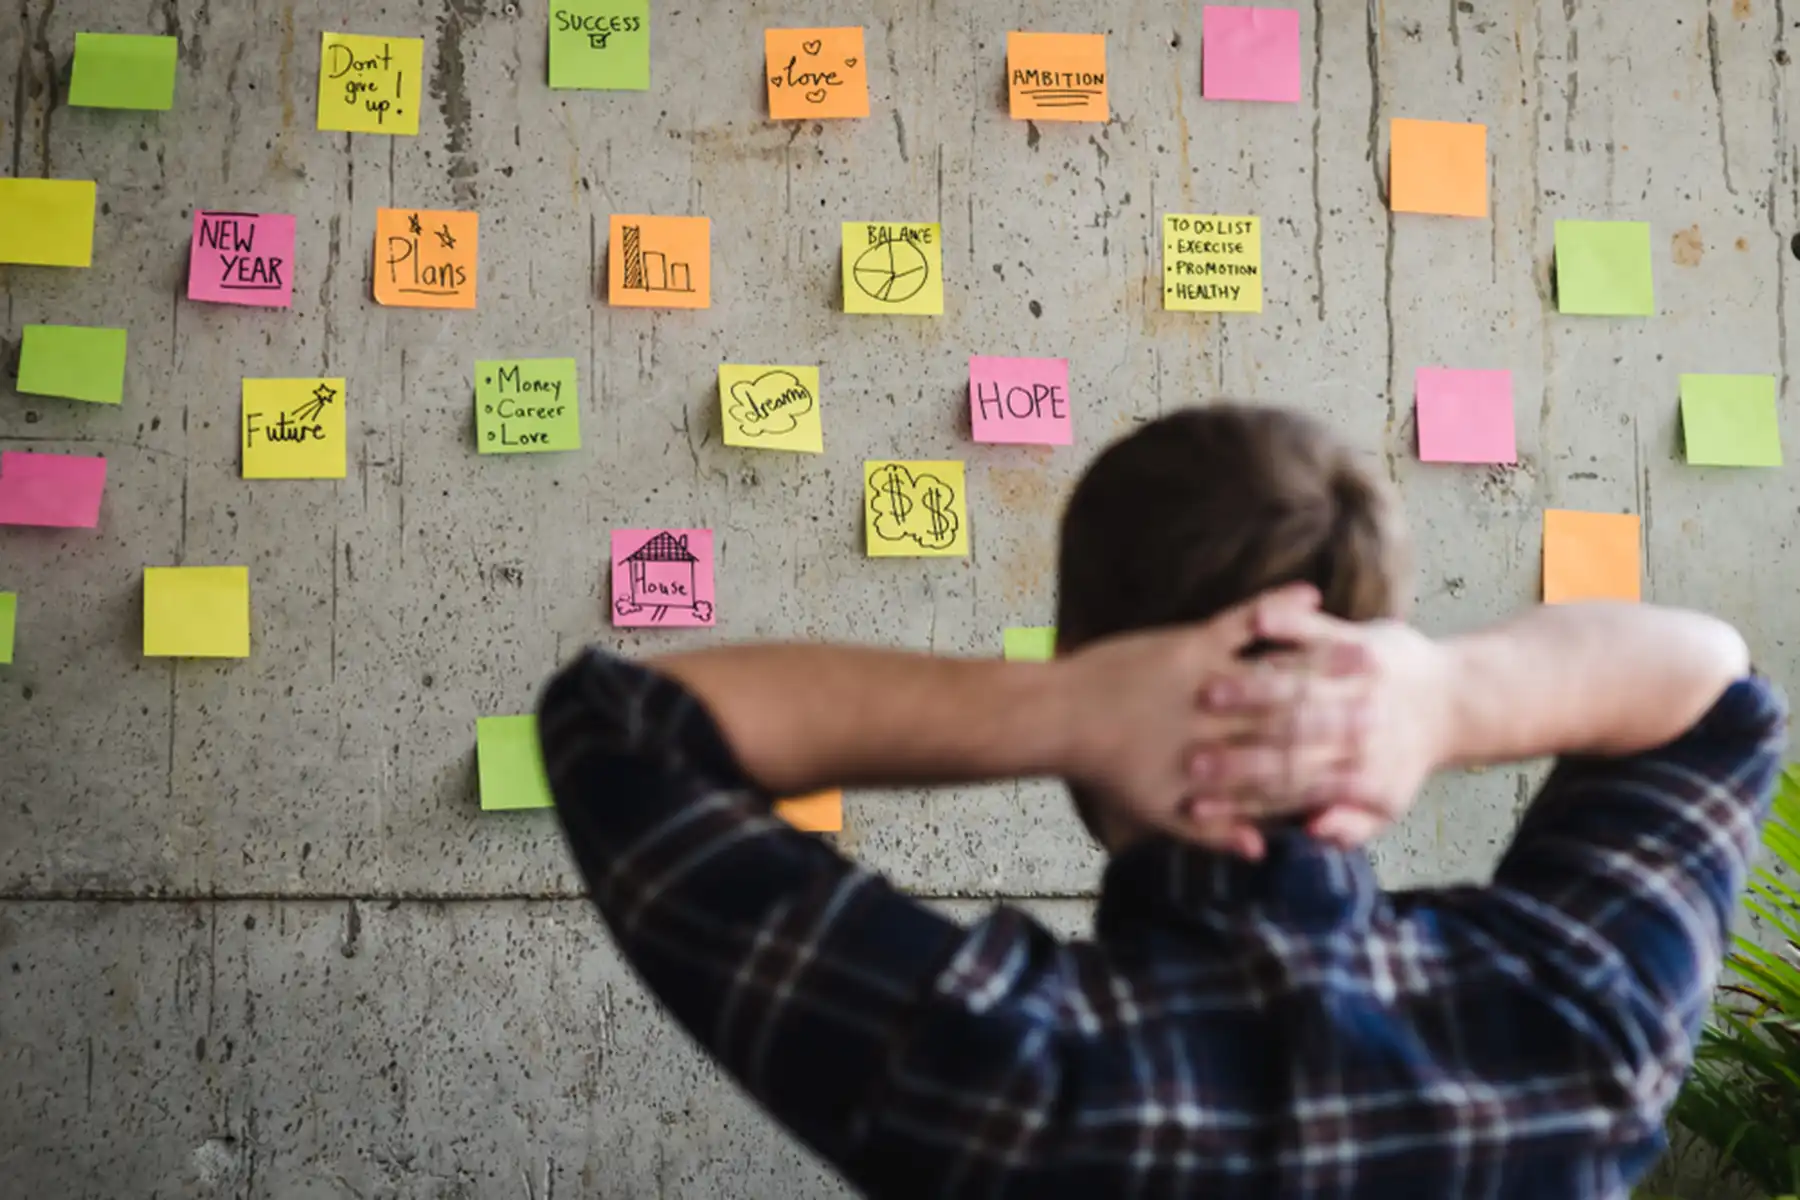 A man leans back in his chair and looks at sticky notes on a wall with ideas on it.